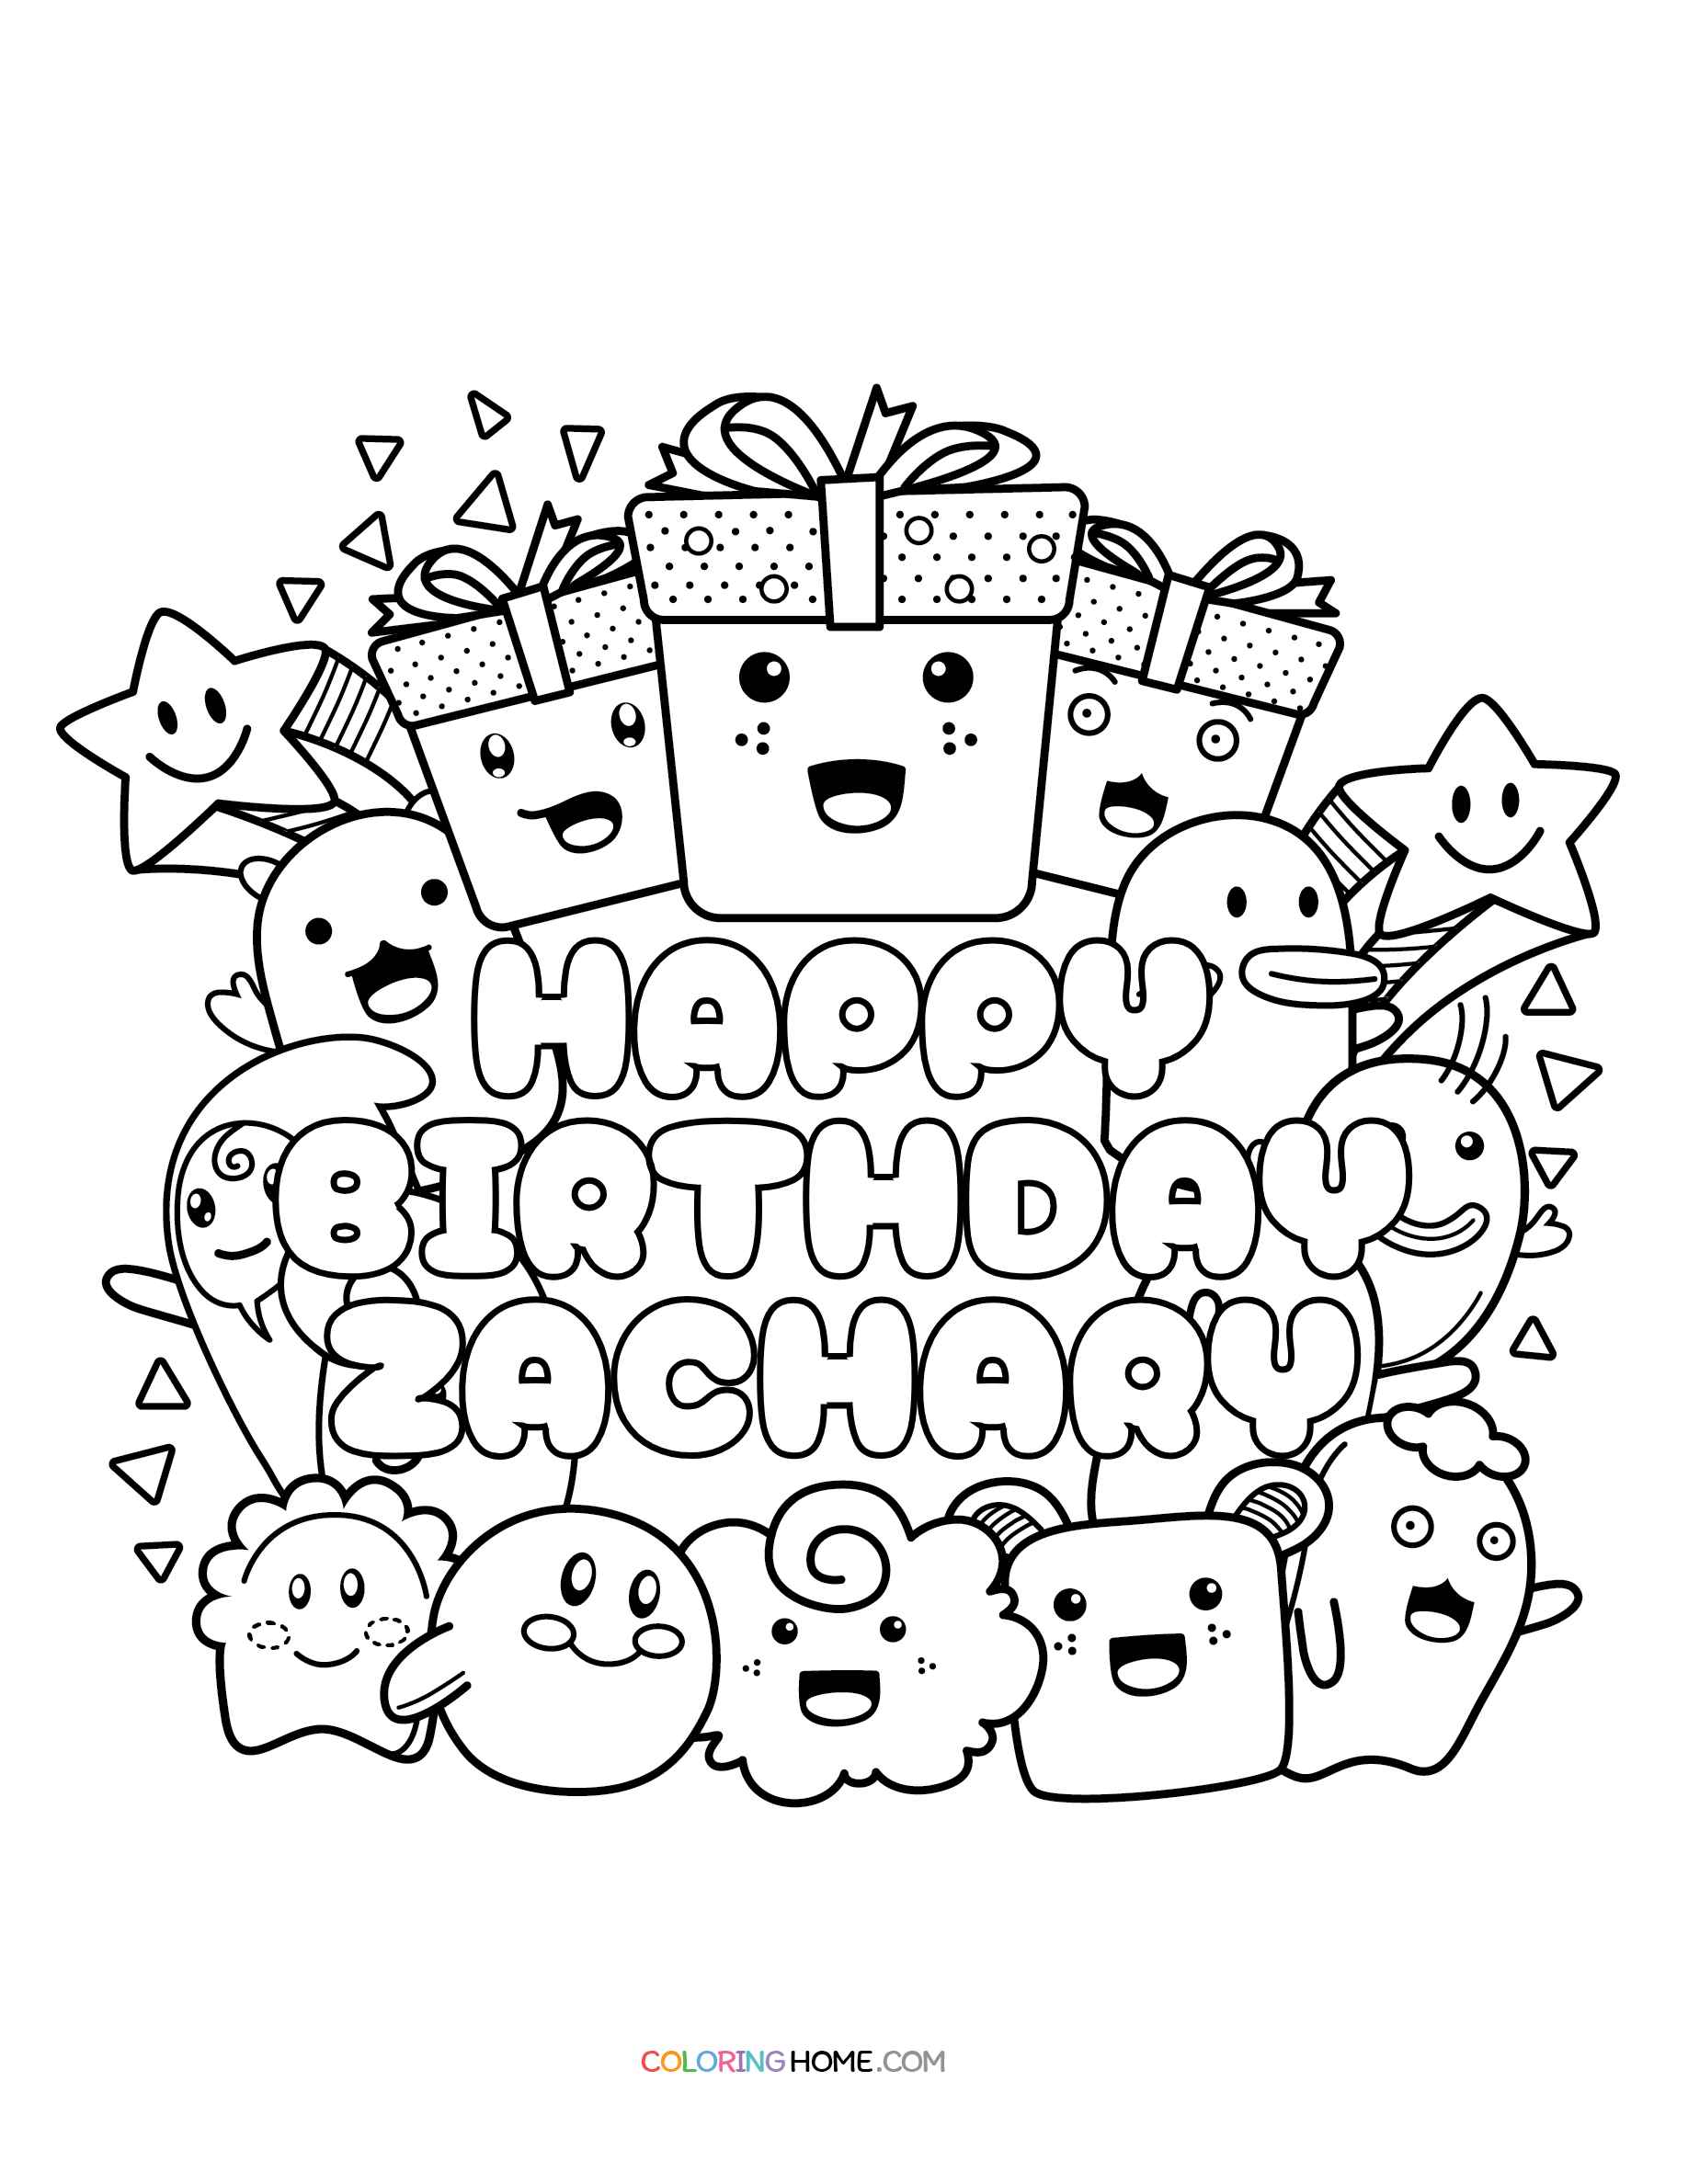 Happy Birthday Zachary coloring page